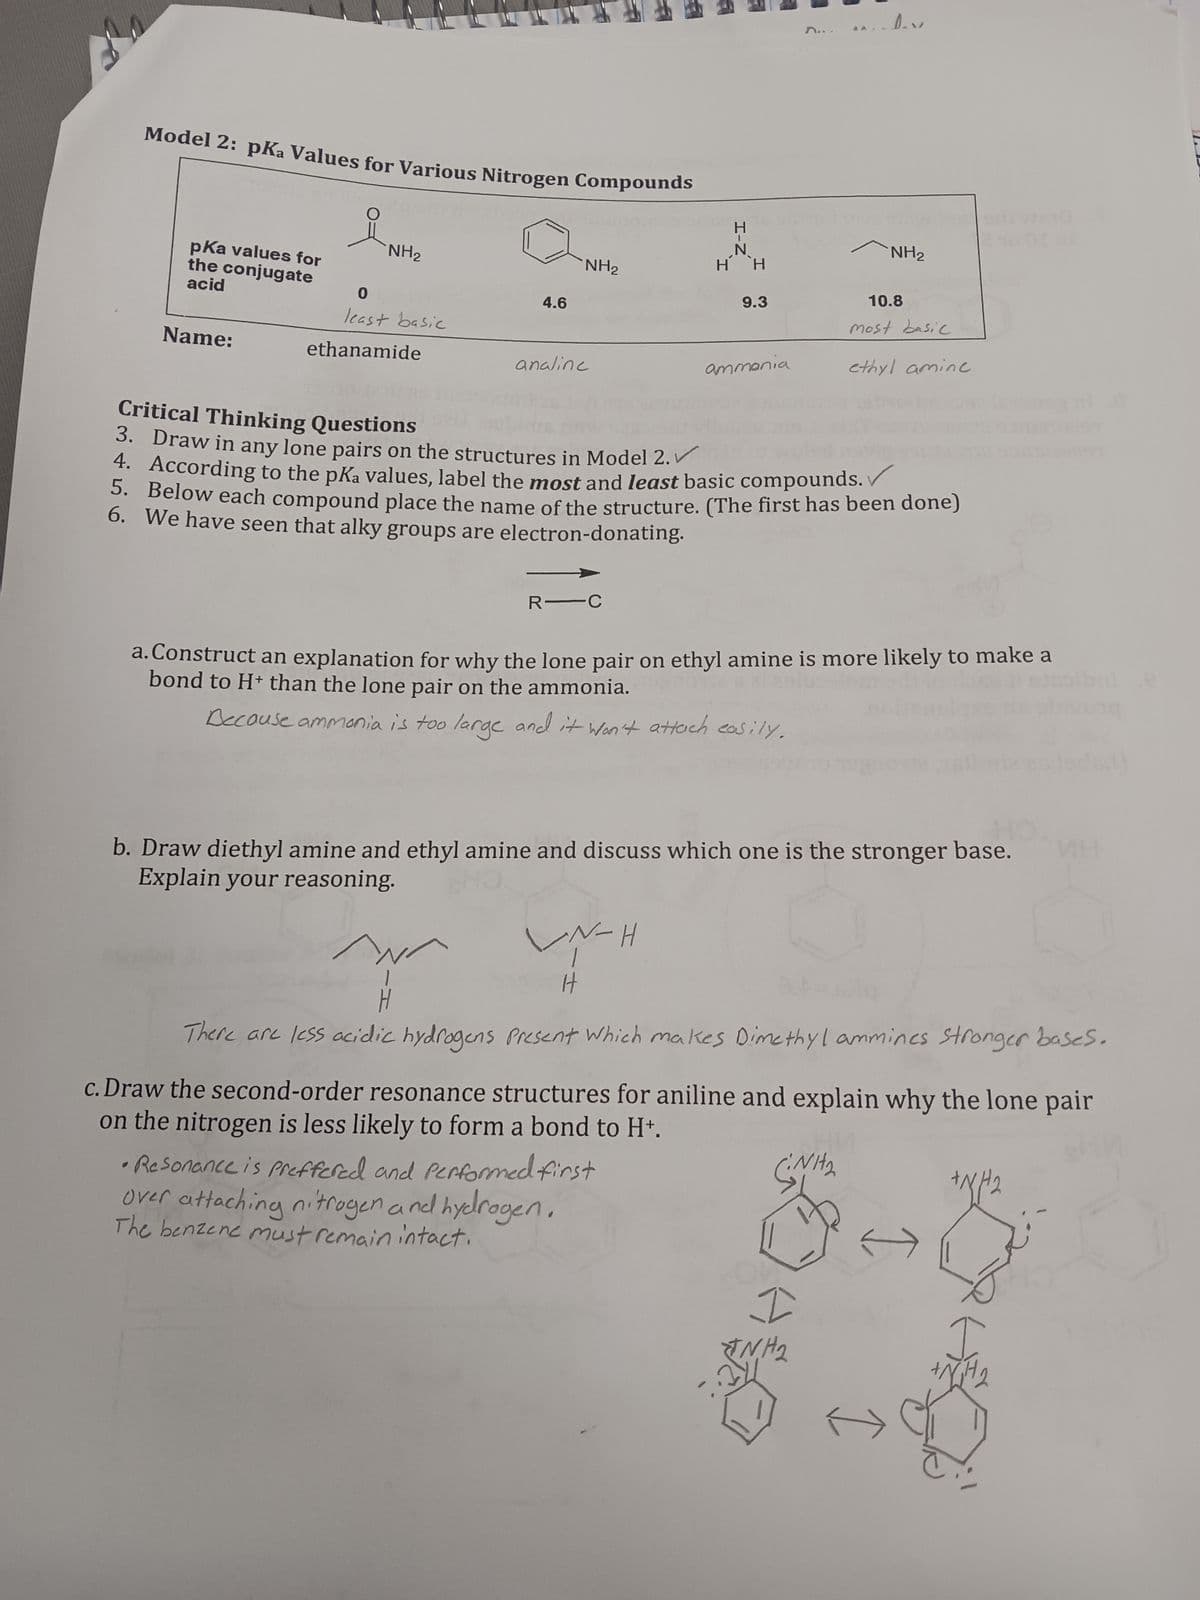 Model 2: pKa Values for Various Nitrogen Compounds
요
pKa values for
the conjugate
acid
Name:
NH₂
0
least basic
ethanamide
4.6
NH₂
analine
R-C
H-Z
N-H
HH
H
9.3
ammonia
•Resonance is preffered and performed first
Over attaching nitrogen and hydrogen.
The benzene must remain intact.
Critical Thinking Questions
3. Draw in any lone pairs on the structures in Model 2.
4. According to the pKa values, label the most and least basic compounds.
5. Below each compound place the name of the structure. (The first has been done)
6.
We have seen that alky groups are electron-donating.
quino 501 Wed
NH₂
a. Construct an explanation for why the lone pair on ethyl amine is more likely to make a
bond to H+ than the lone pair on the ammonia.
Decause ammonia is too large and it won't attach easily.
10.8
most basic
HO
b. Draw diethyl amine and ethyl amine and discuss which one is the stronger base.
Explain your reasoning.
ethyl amine.
I
TNH₂
w
There are less acidic hydrogens Present which makes Dimethyl ammines stronger bases.
c. Draw the second-order resonance structures for aniline and explain why the lone pair
on the nitrogen is less likely to form a bond to H+.
Nit₂
+N//2